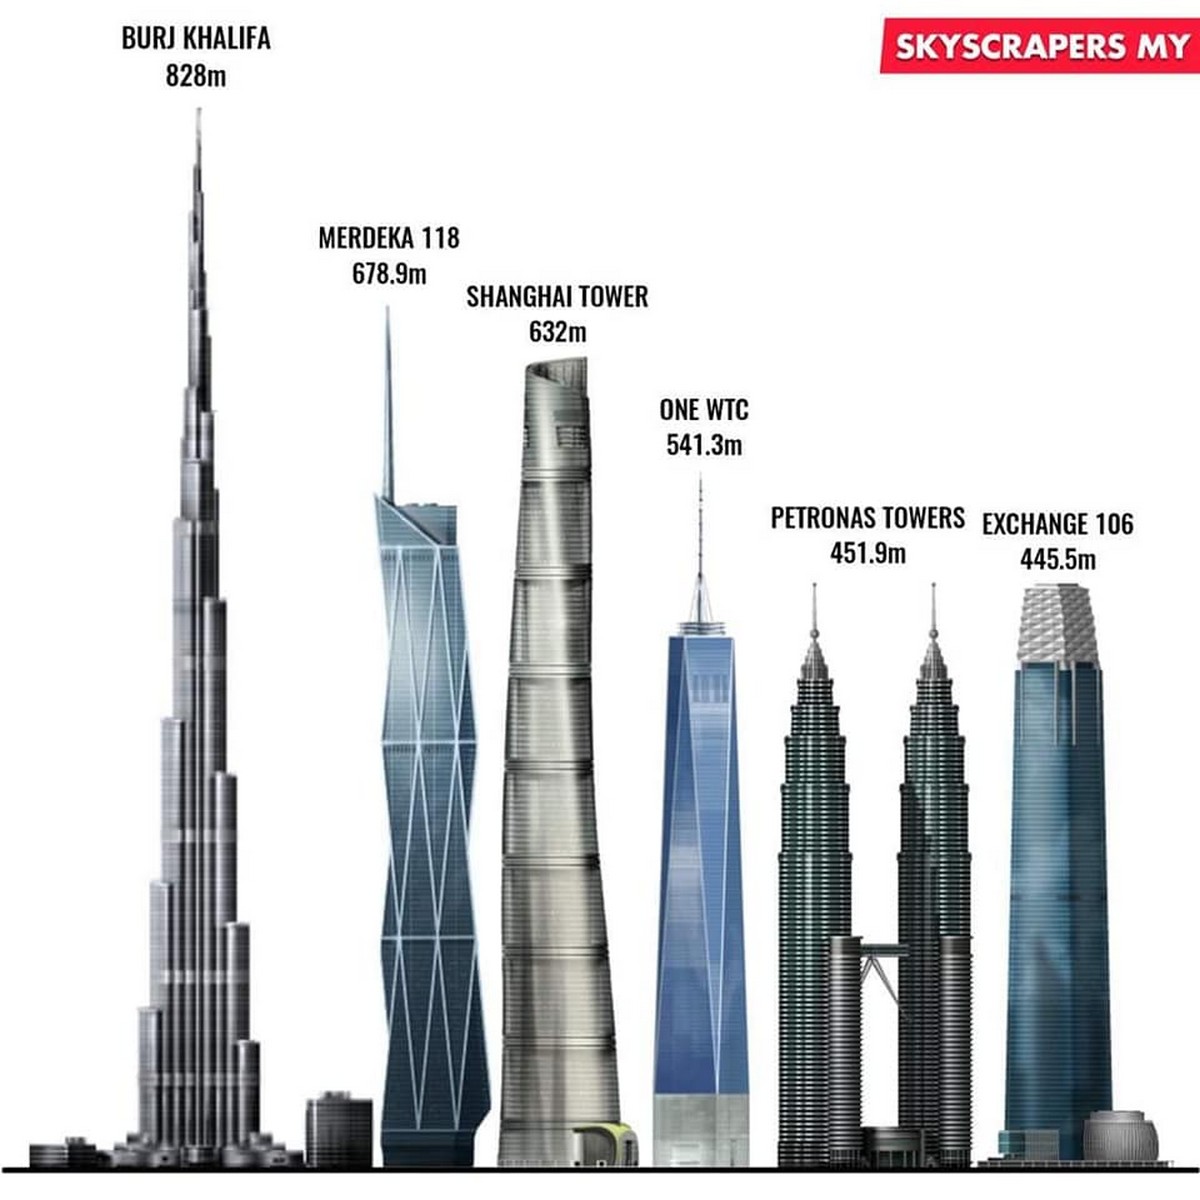 Merdeka 118 Tower Will Be The Tallest Building In Malaysia Where Your